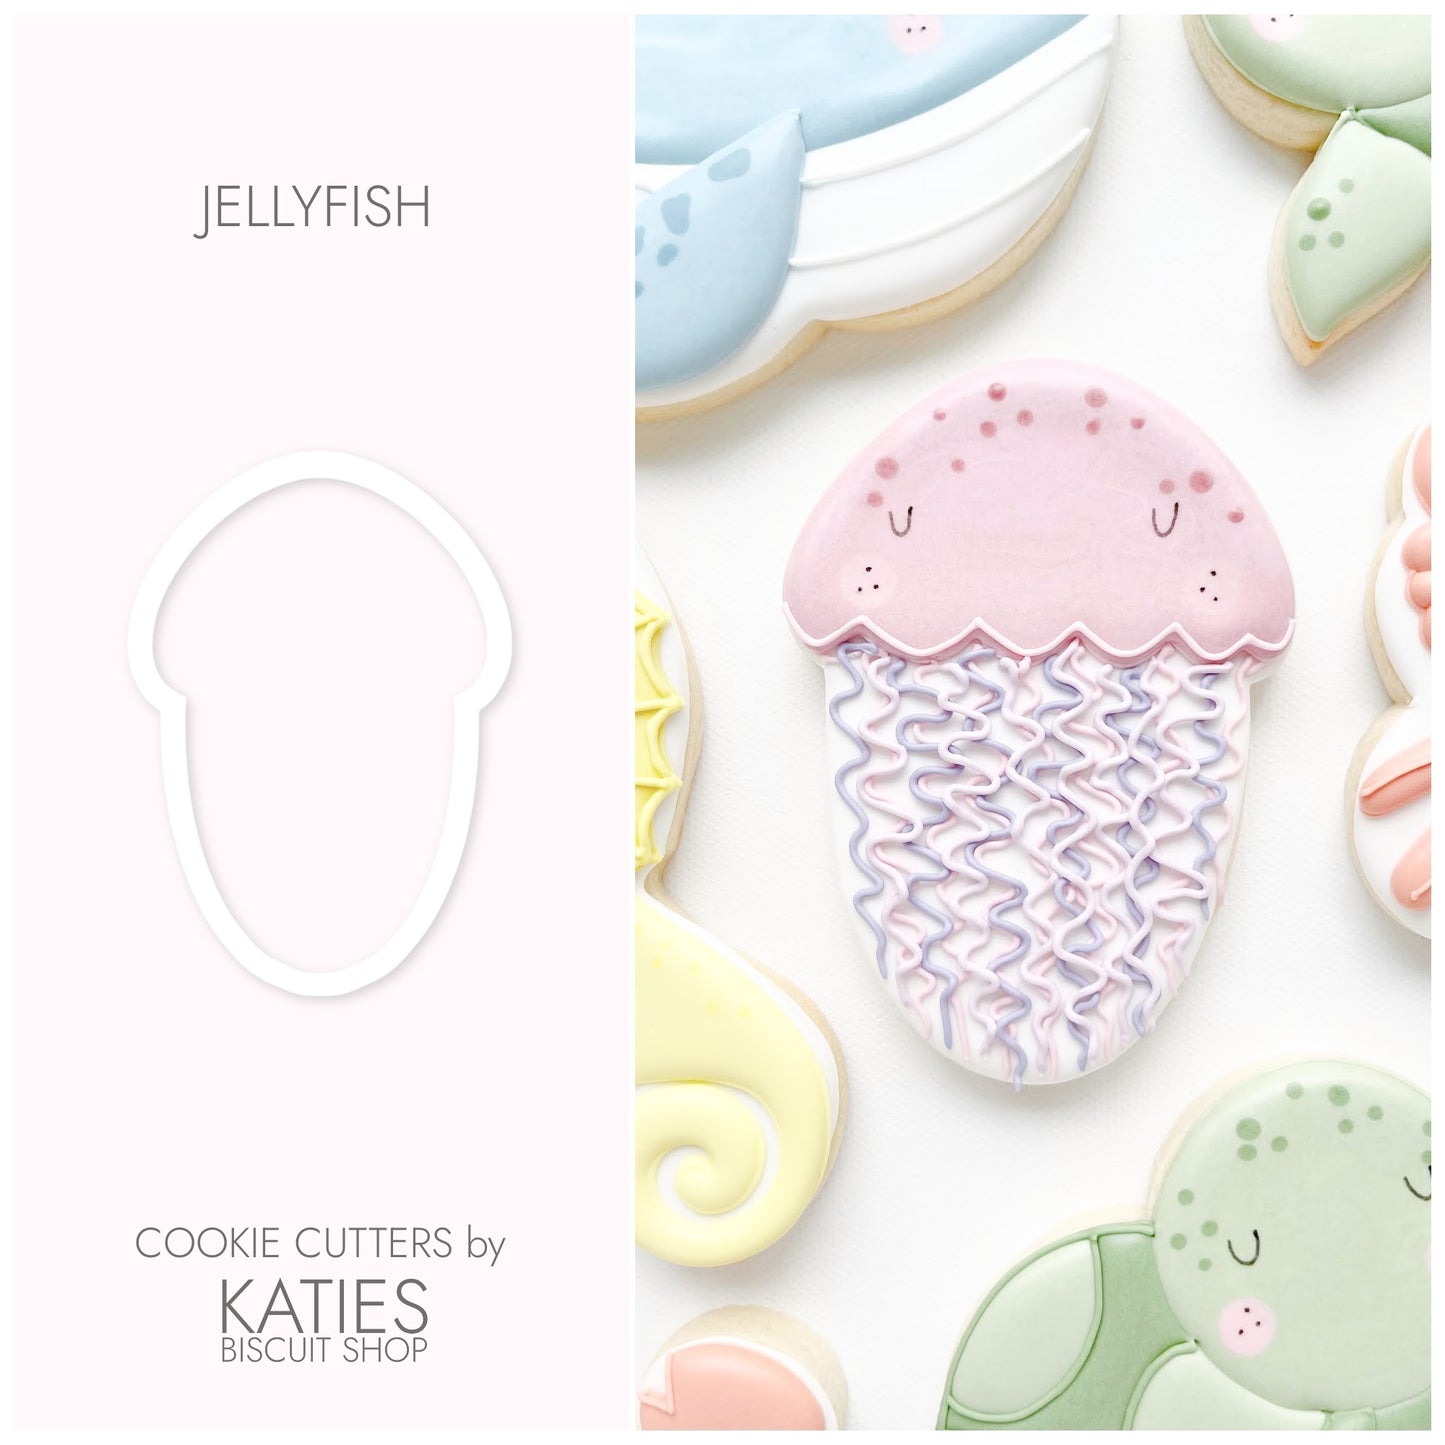 jelly fish 3d printed cookie cutter by katies biscuit shop